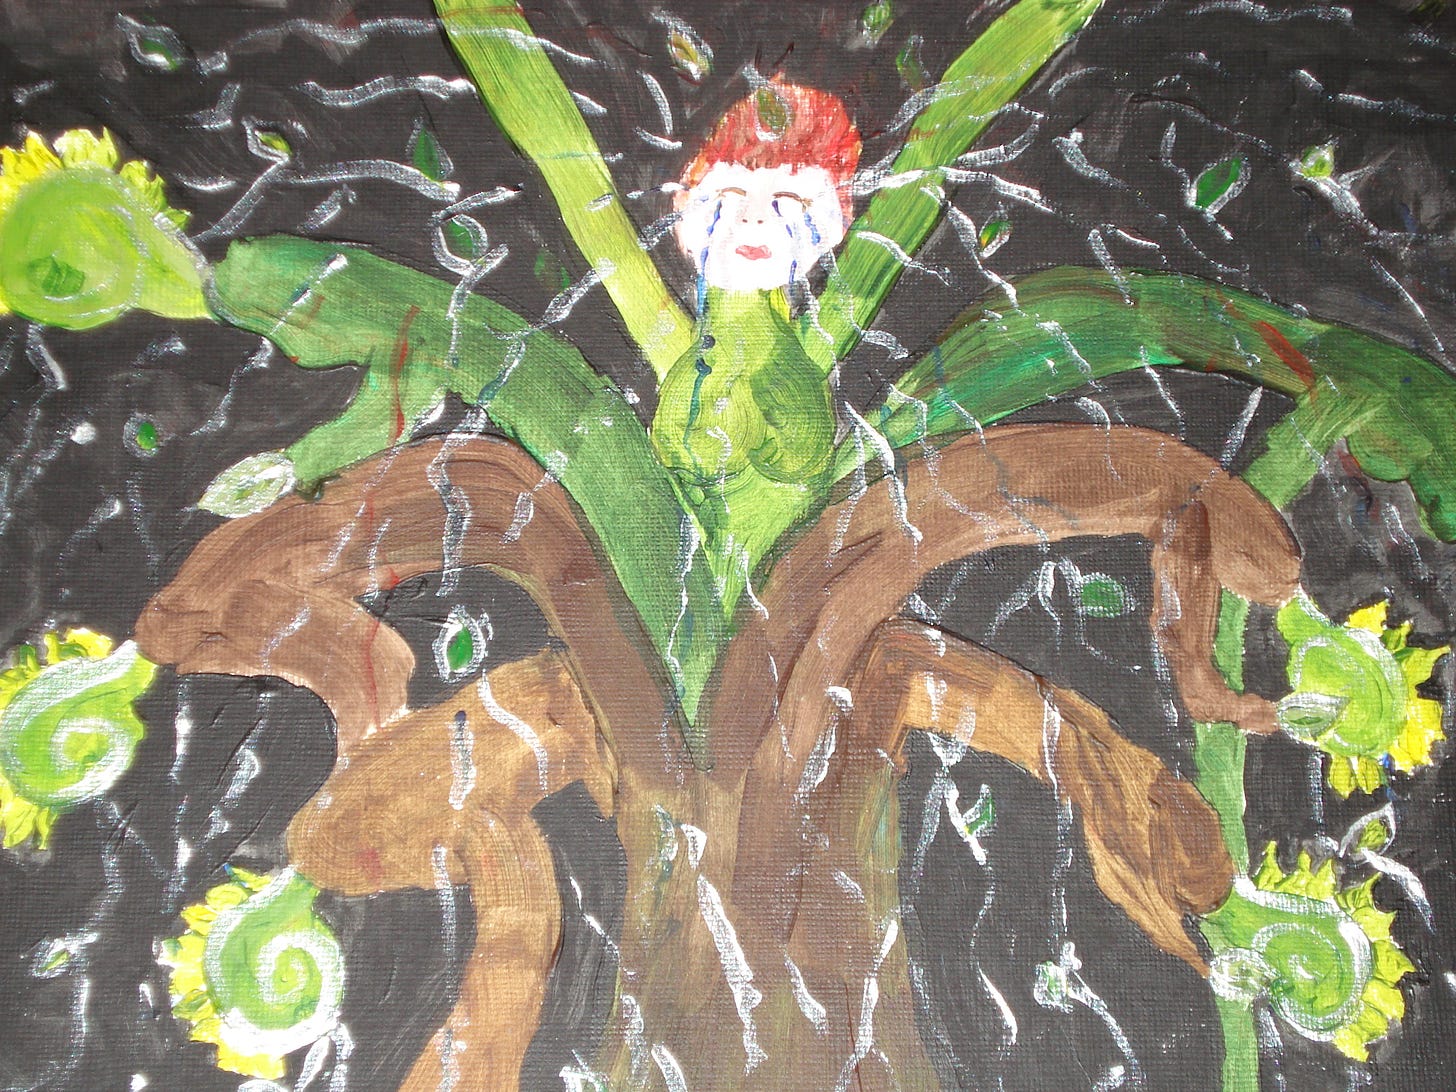 Painting of crying woman/weeping willow tree. Green and brown tree on black background with silver tears.